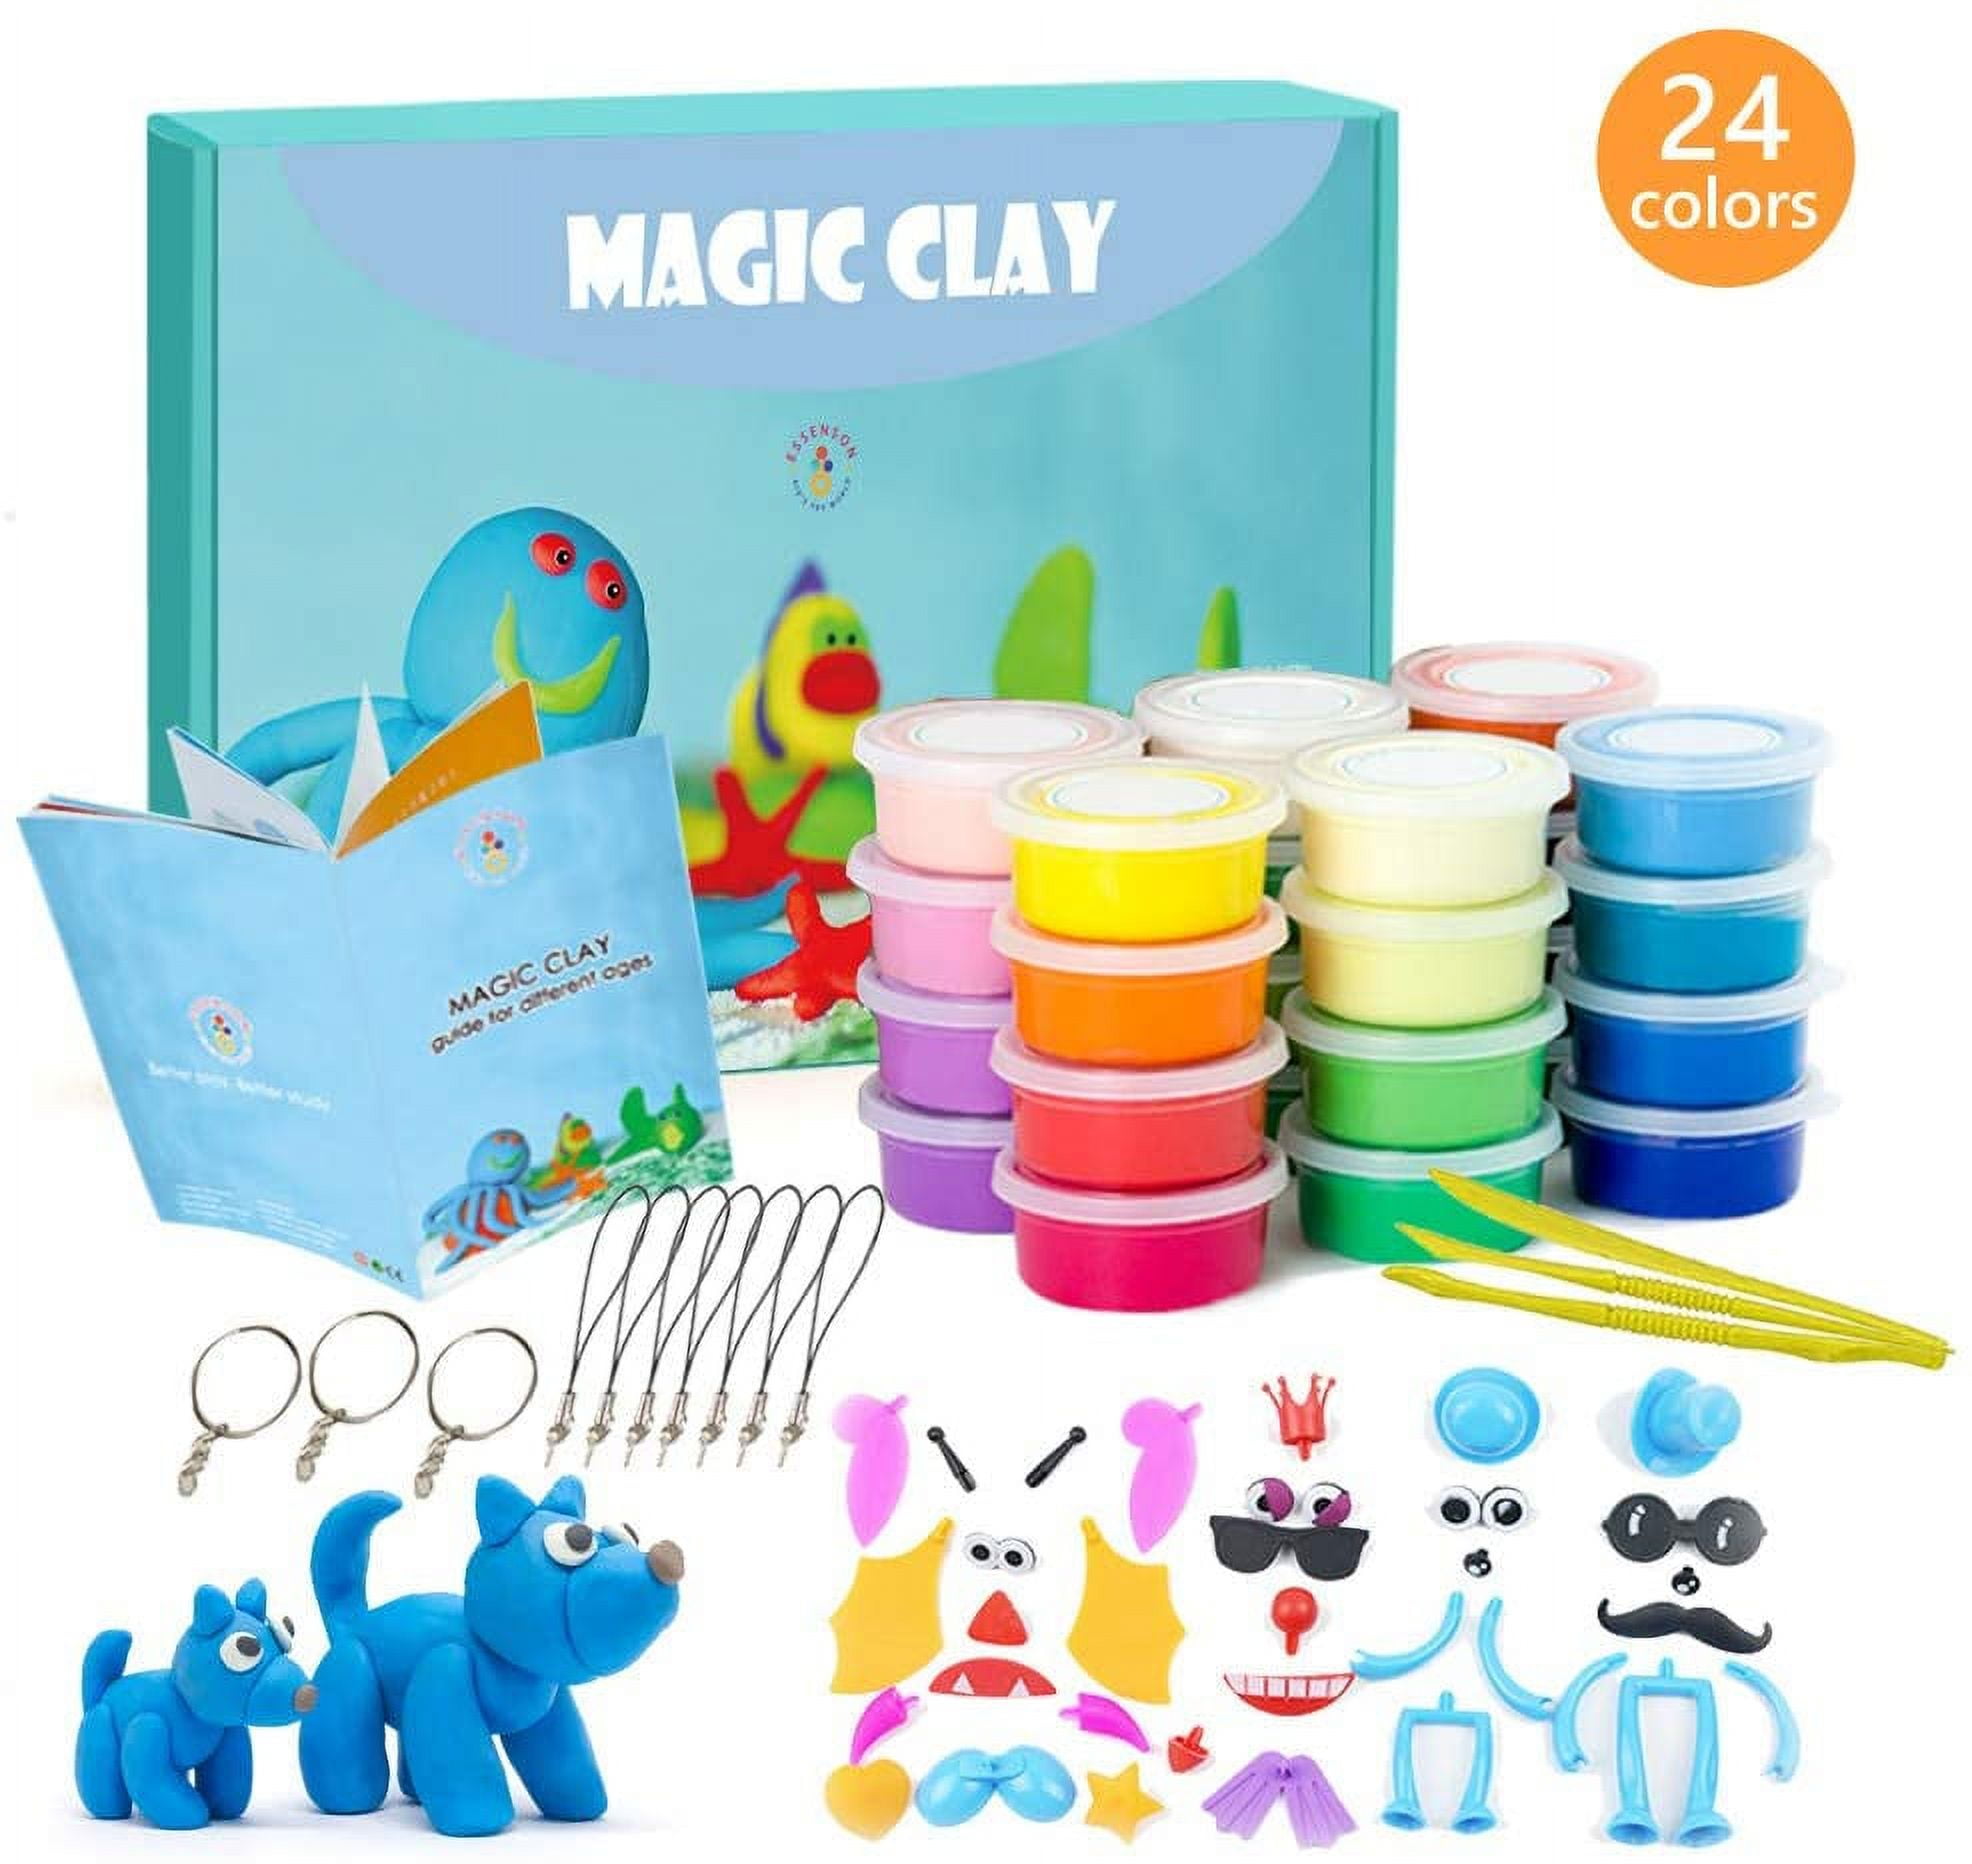 TBC The Best Crafts Model Magic Clay, 24 Colors Air Dry Clay,Ultra  Light,Smooth,Non-Toxic, Creative Sensory Toys,Art & Crafts